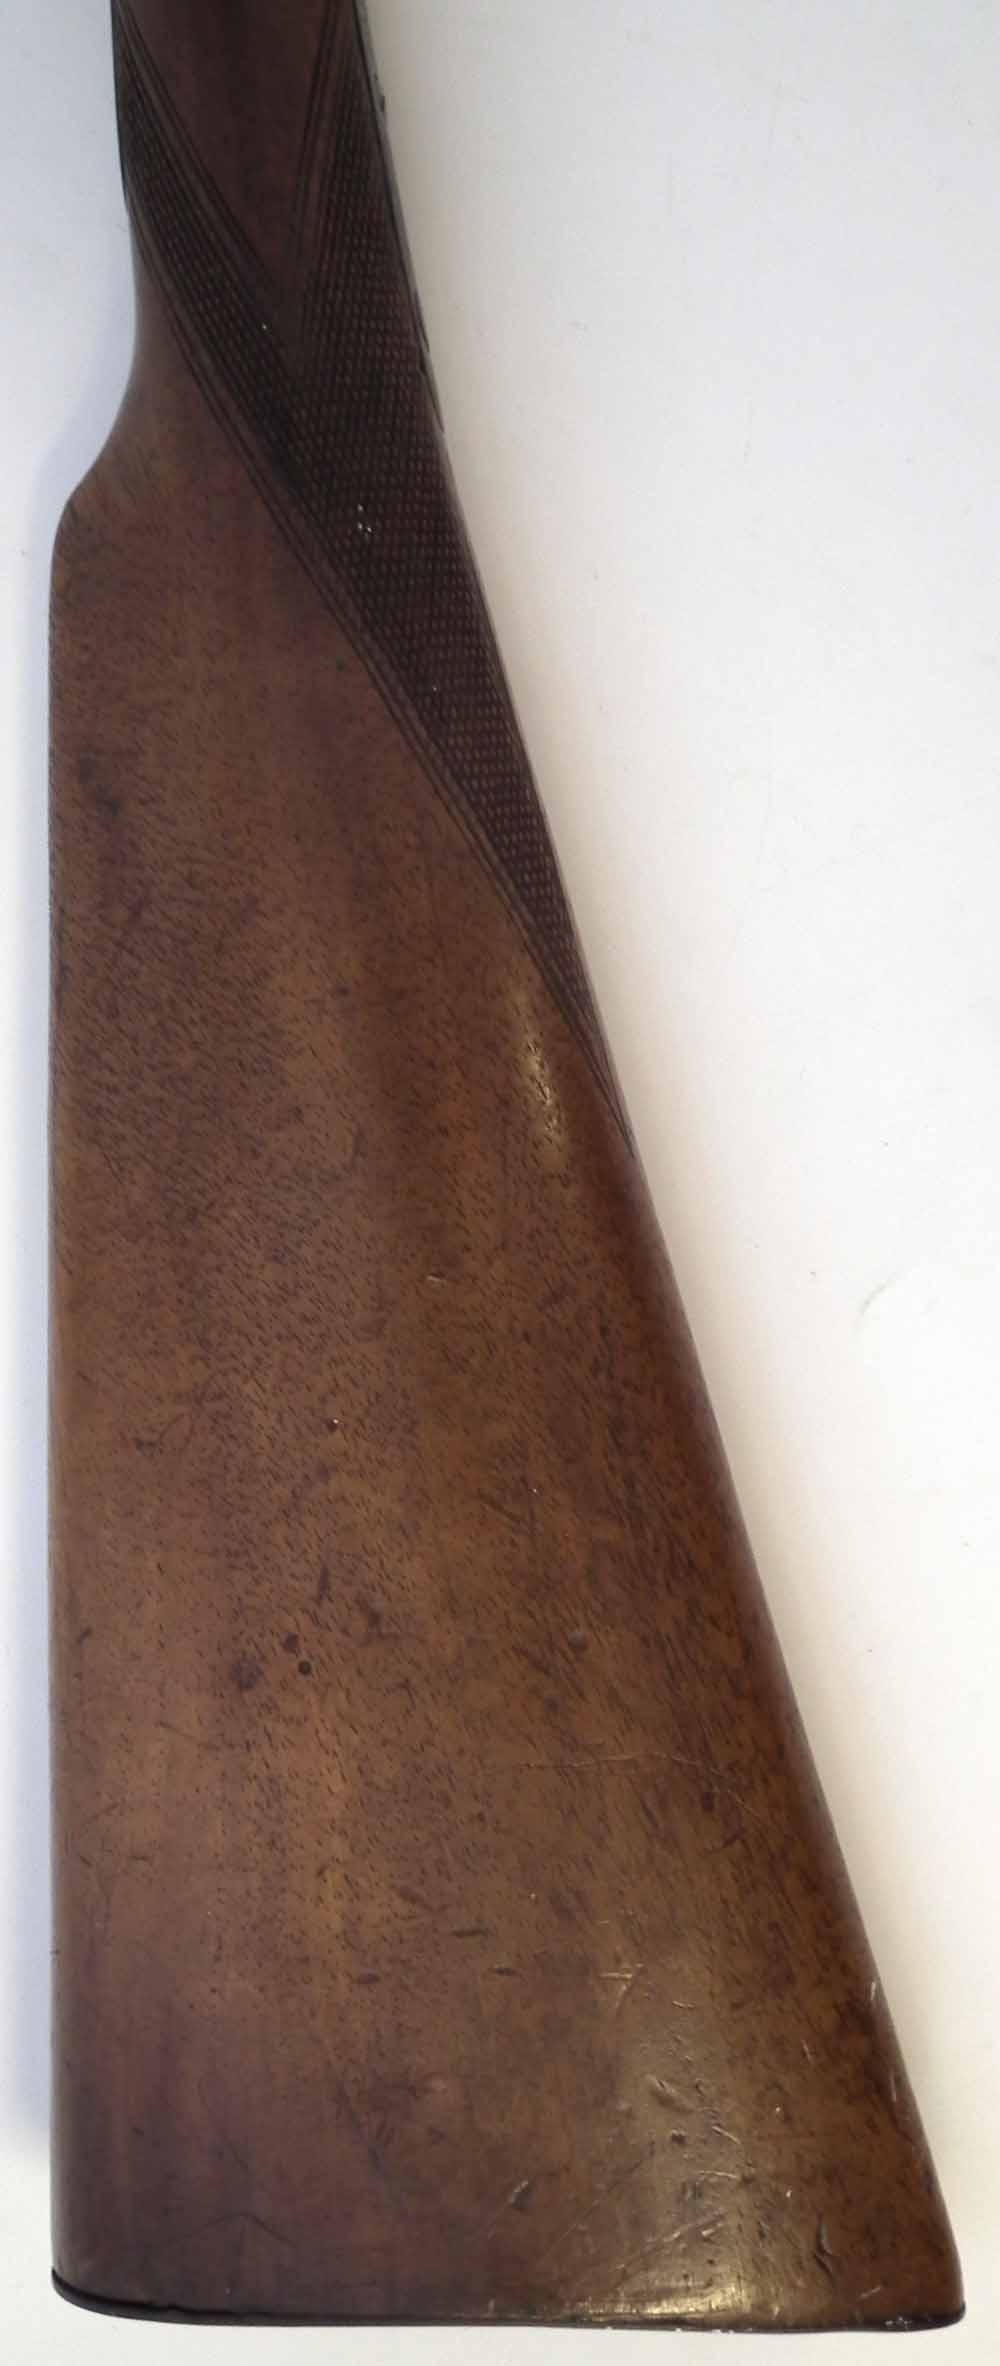 Deactivated .410 Belgian folding shotgun, with chequered walnut stock, deactivated in 1991 with - Image 3 of 10